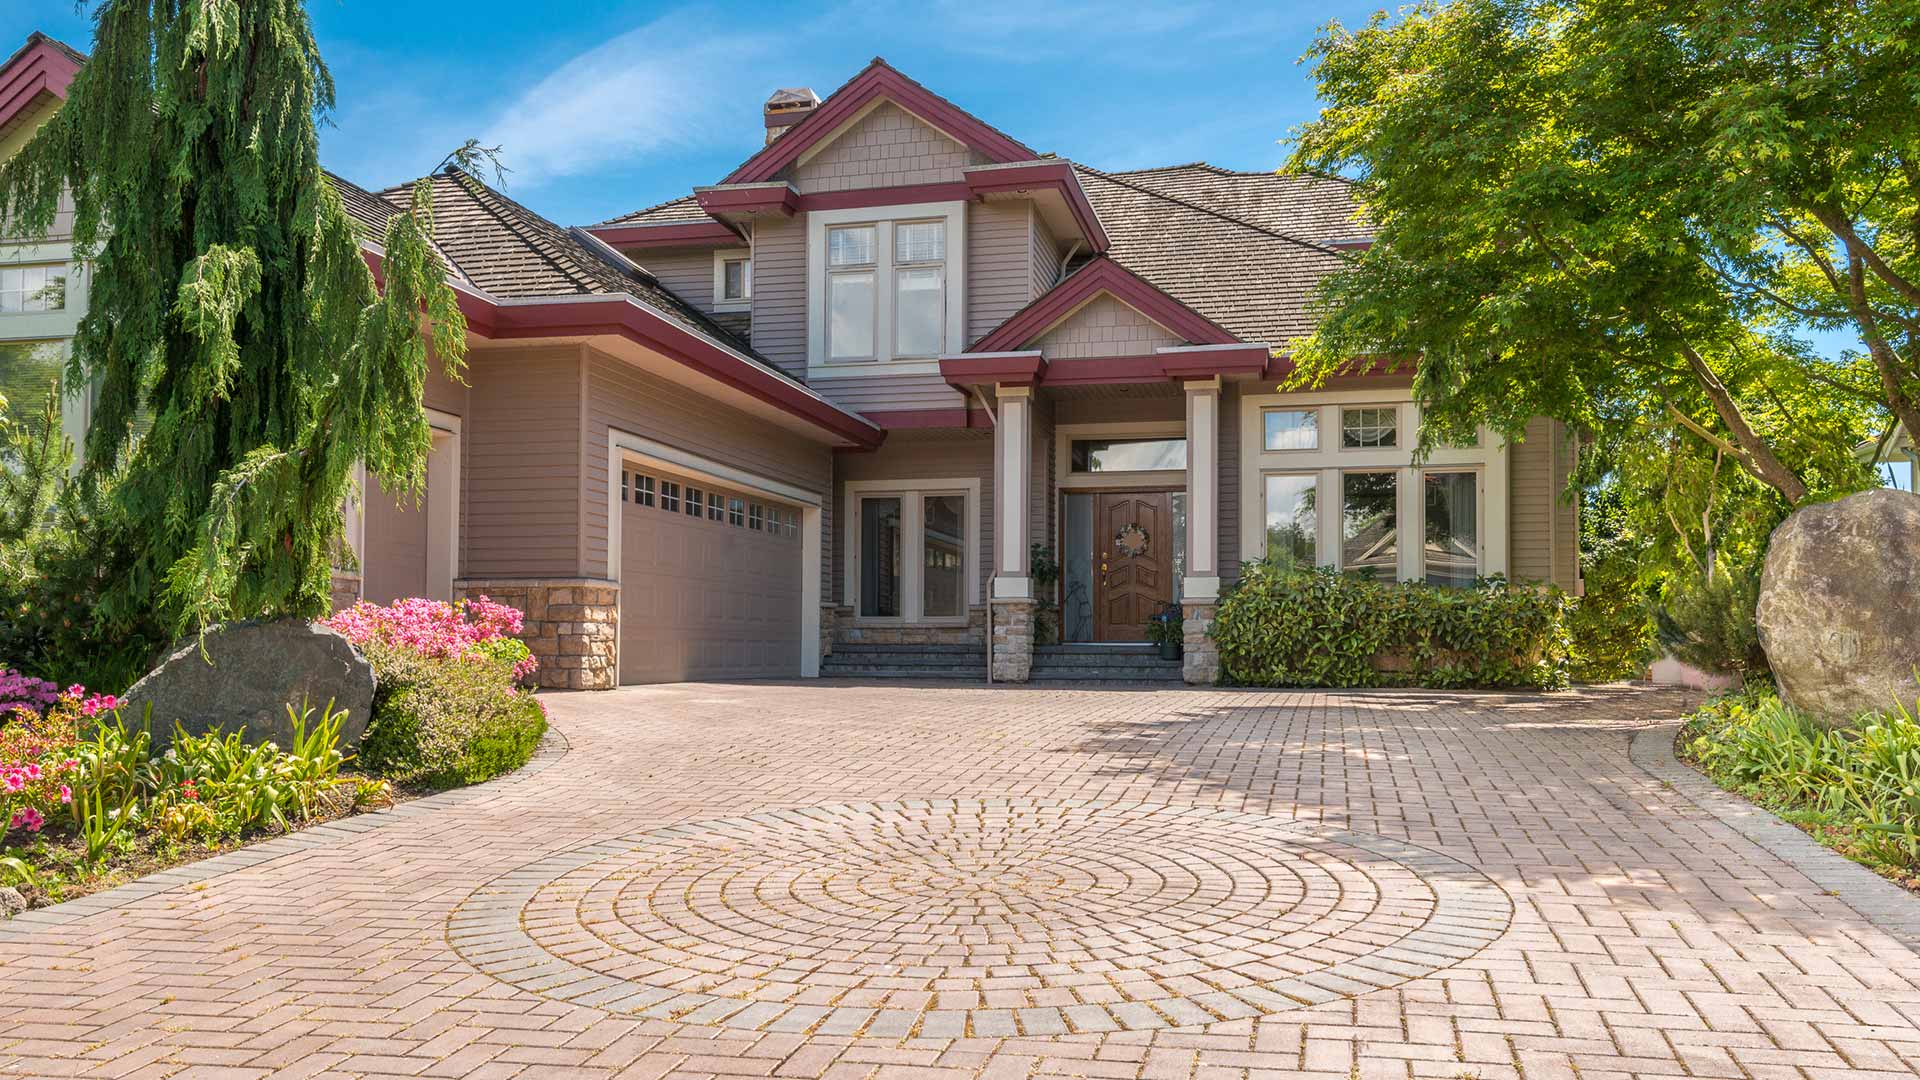 A beautiful home front with a custom driveway